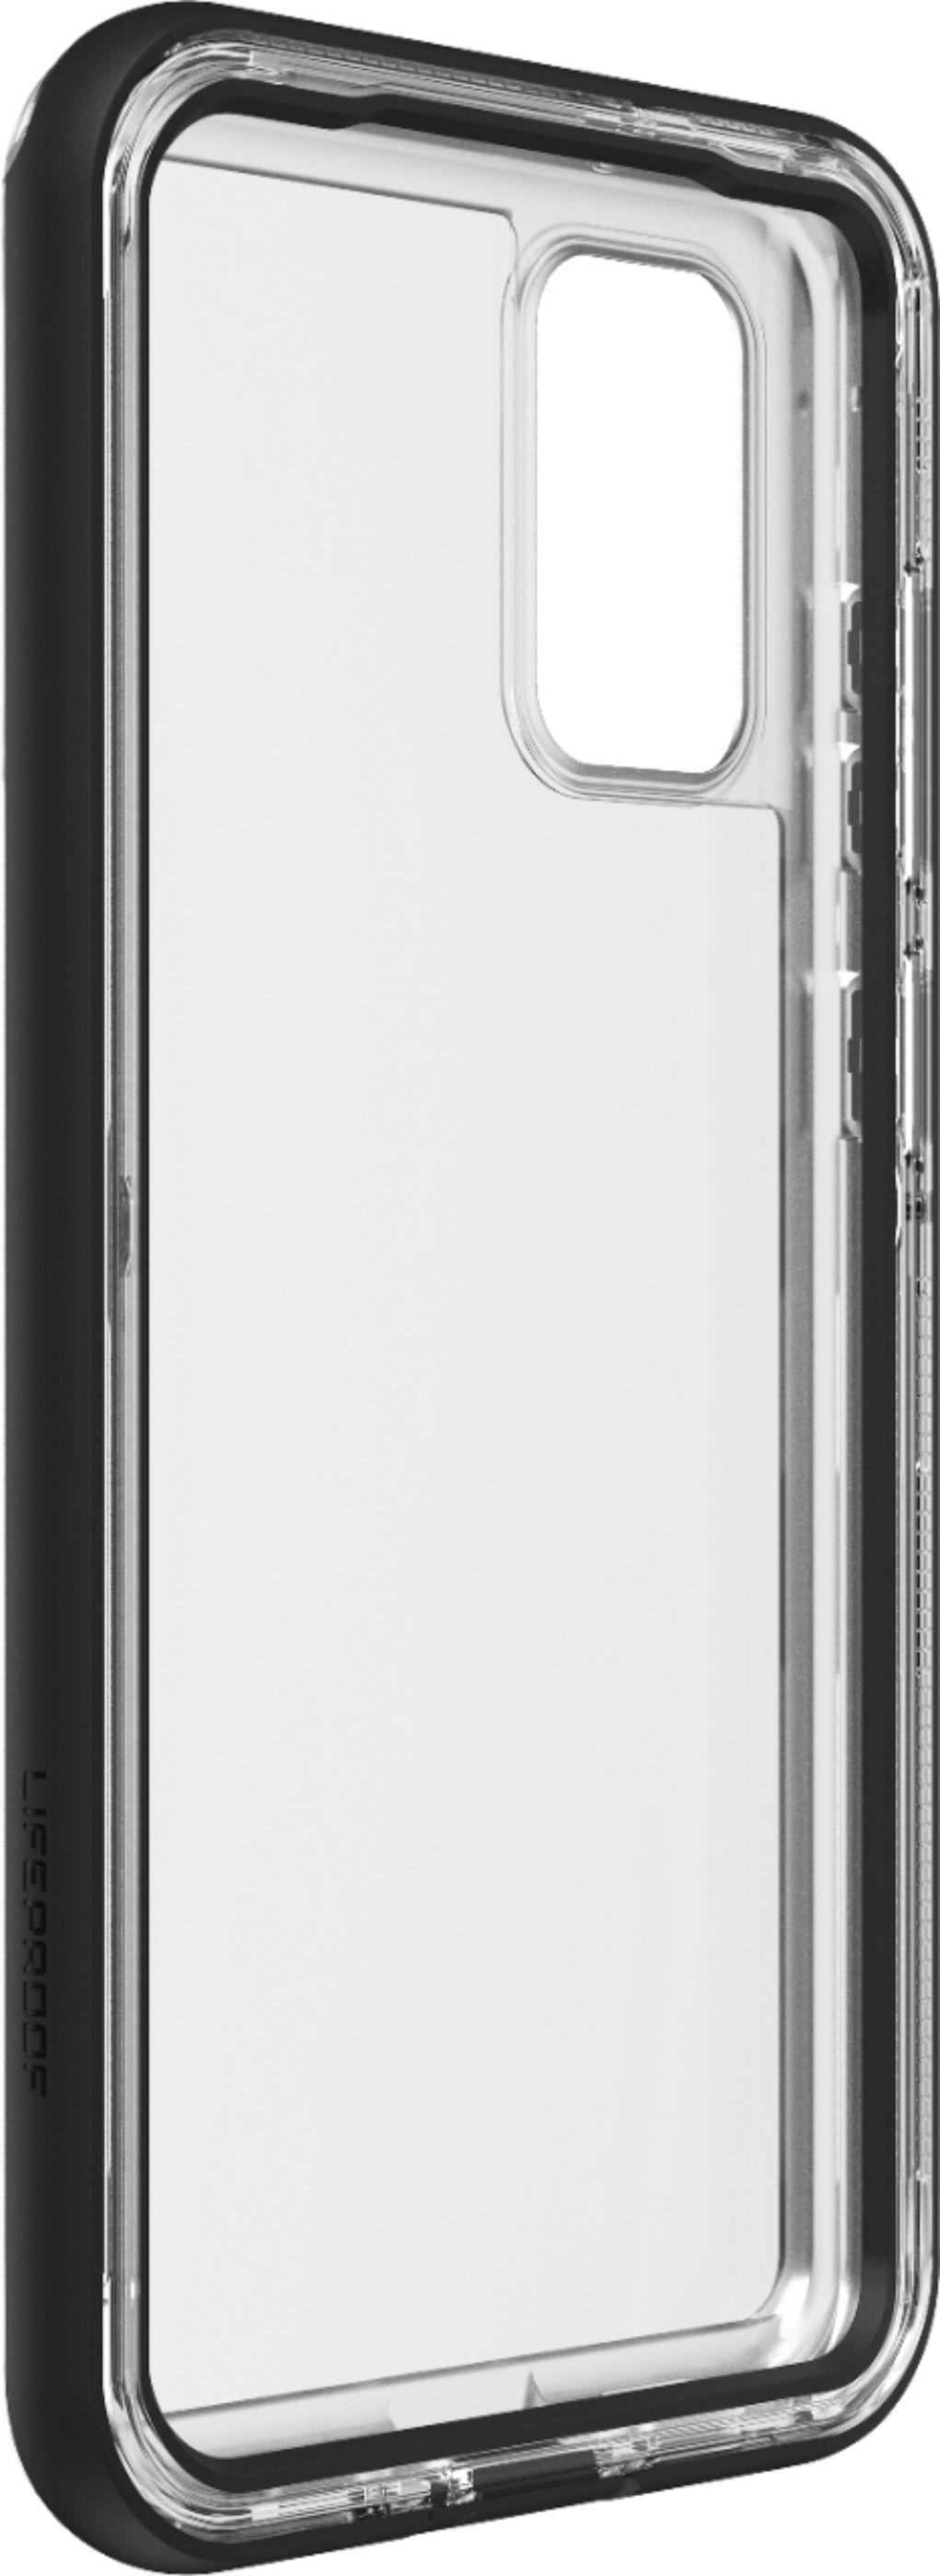 Left View: LifeProof - NËXT Case for Samsung Galaxy S20+ 5G - Black Crystal